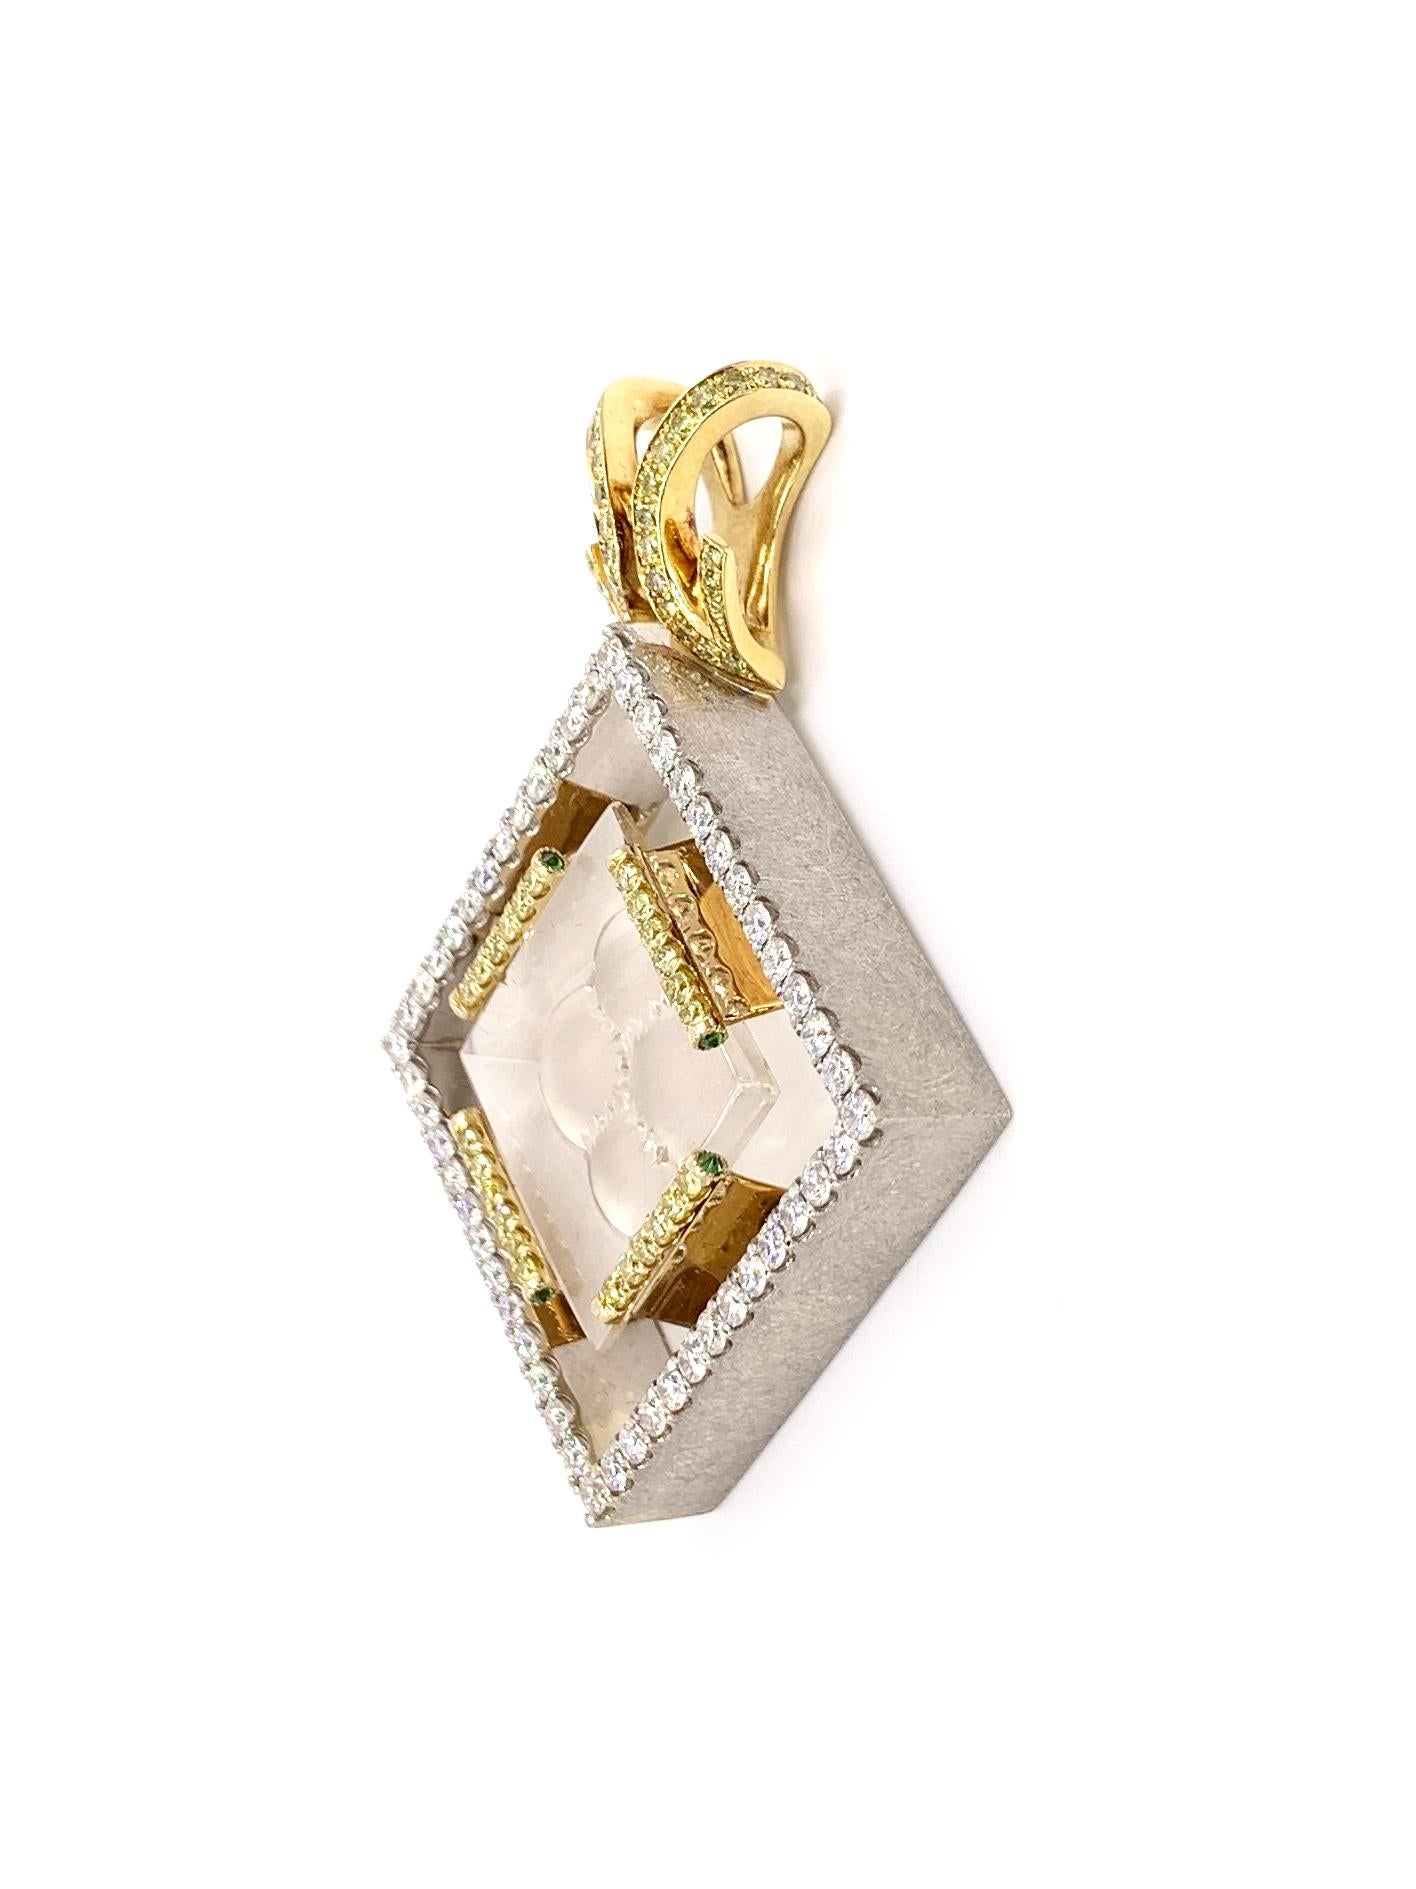 A one of a kind substantial 18 karat white and yellow gold modern pendant featuring a carved rutilated clear quartz with approximately 1.25 carats of white diamonds and .70 carats of yellow diamonds. White diamond quality is approximately F-G color,